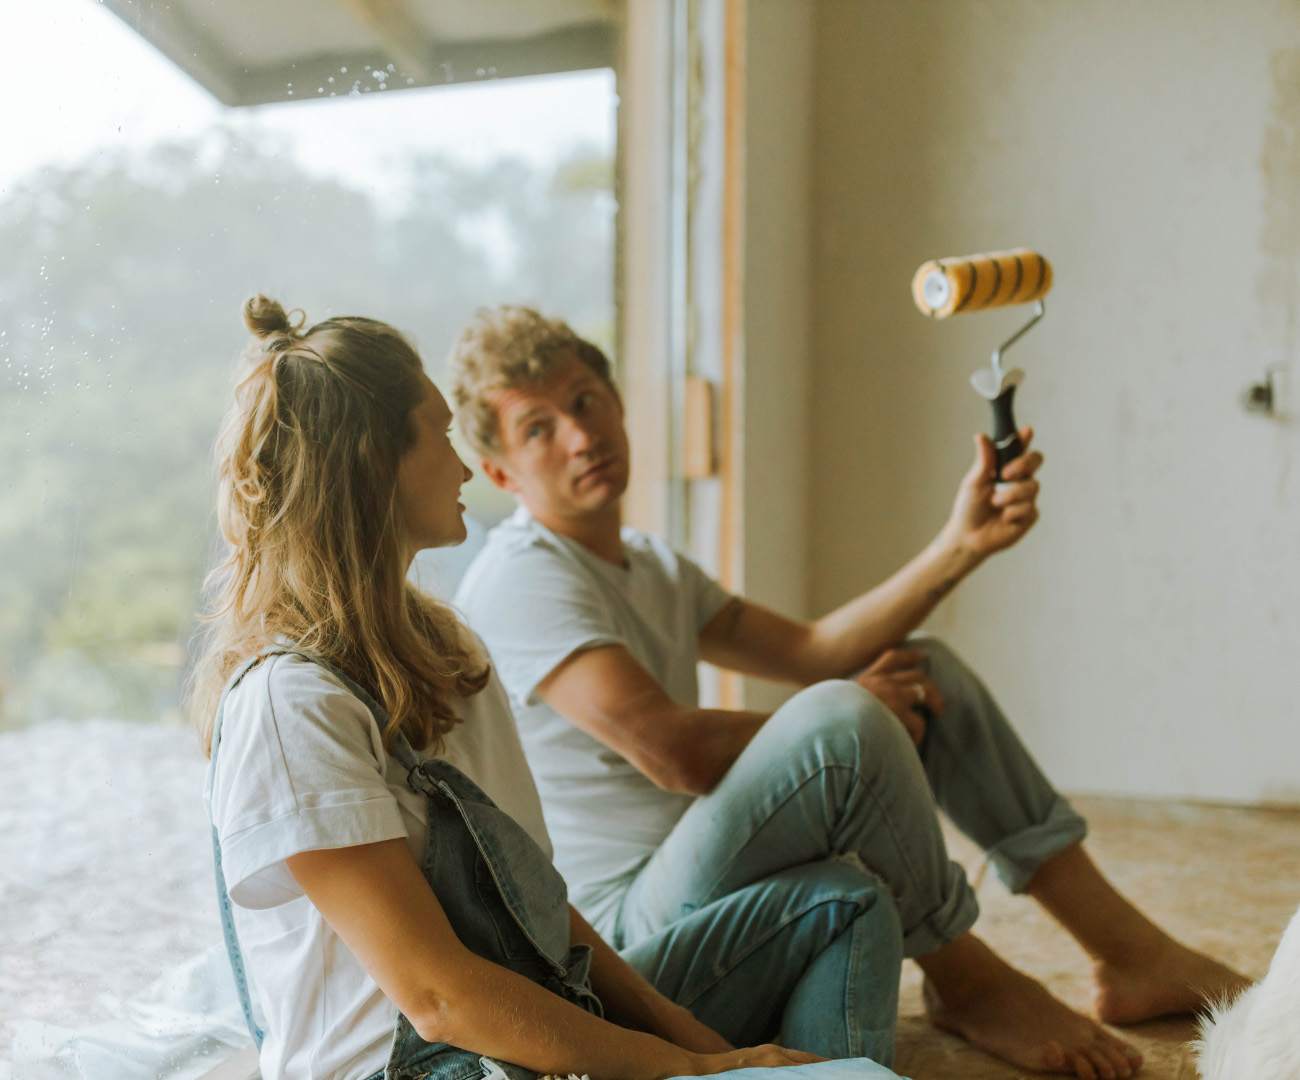 An image of a couple getting ready to decorate